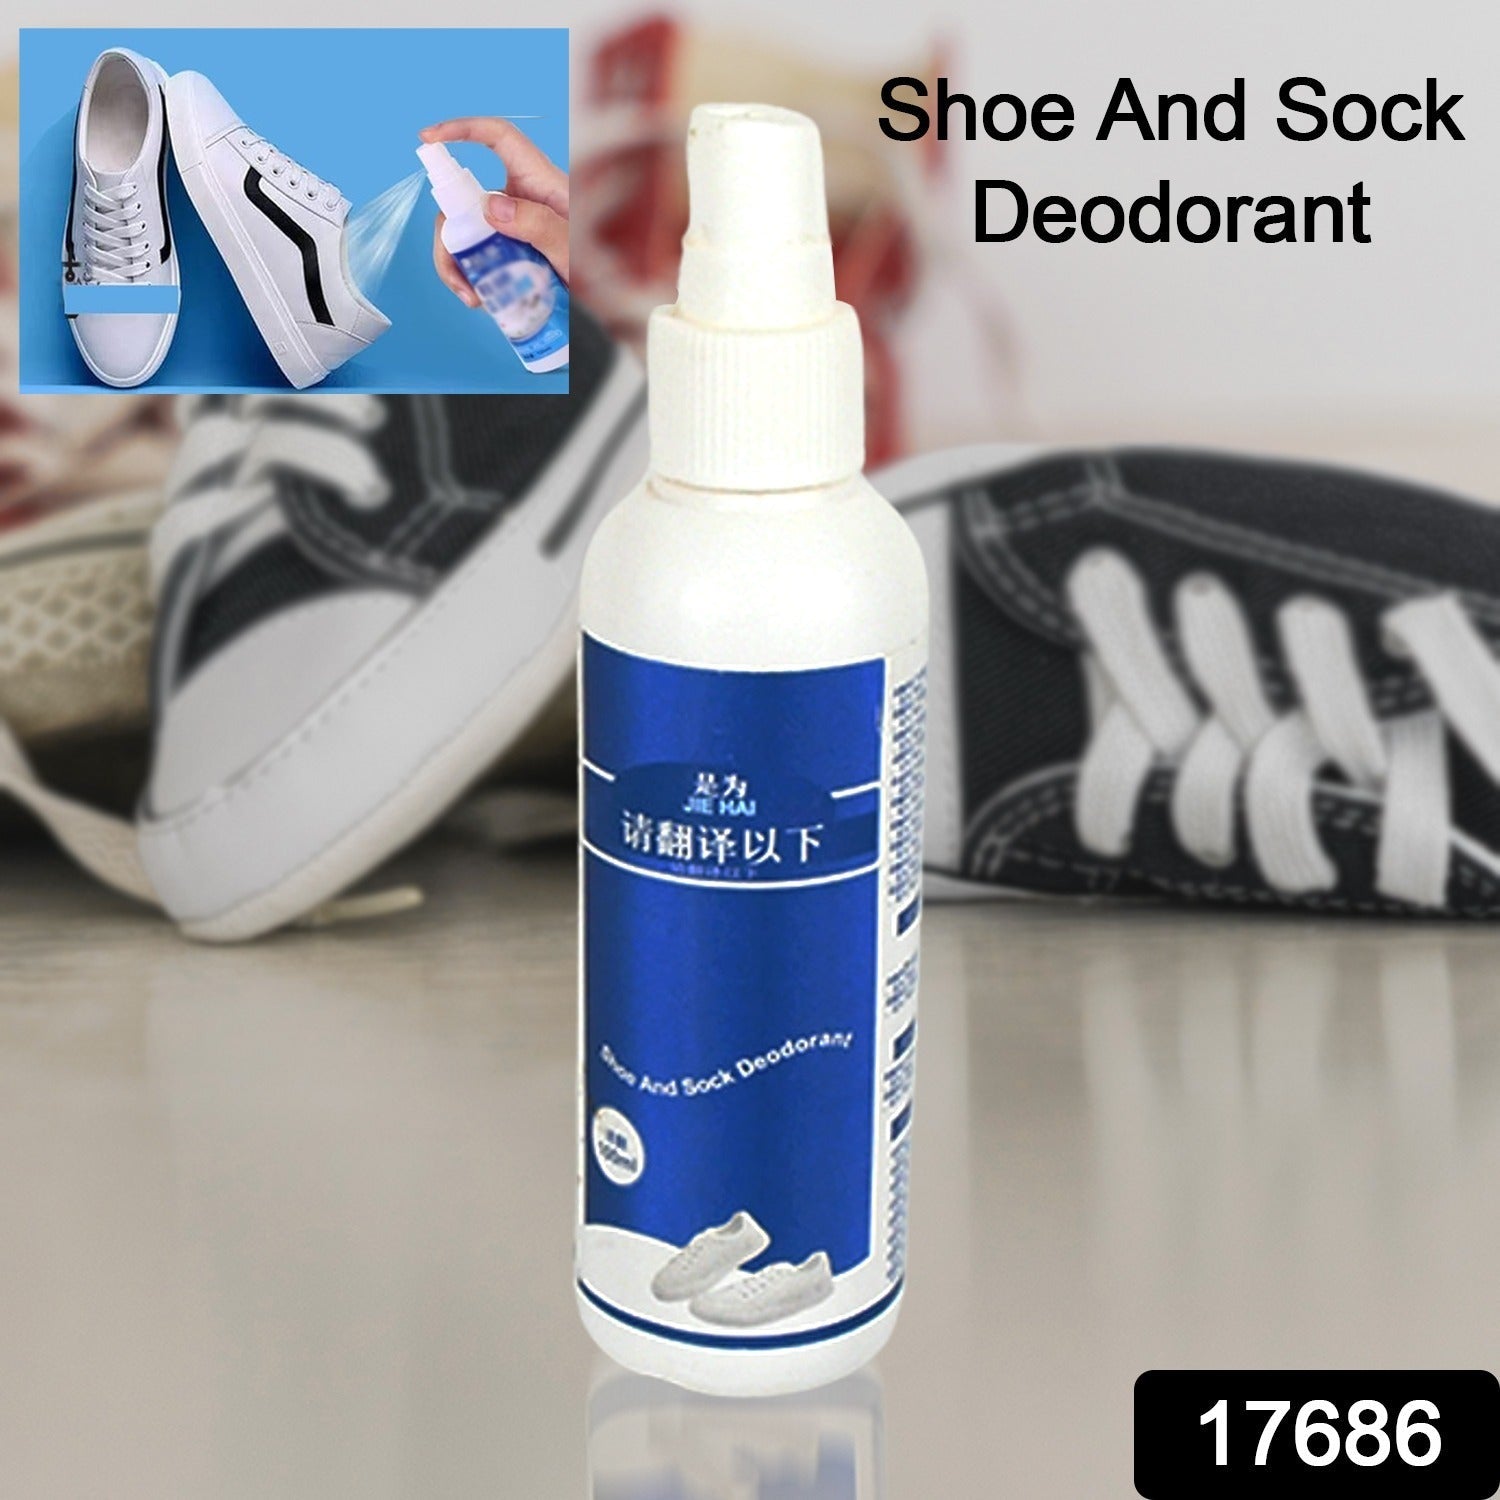 17686 Deodorant Spray for Shoes & Socks, Shoe Deodorizer Spray, Shoe Odor Eliminator Spray, Sneaker & Shoe Deodorant, Freshness for Work Shoes, Safety Shoes, Sports Shoes & More (100 ML)